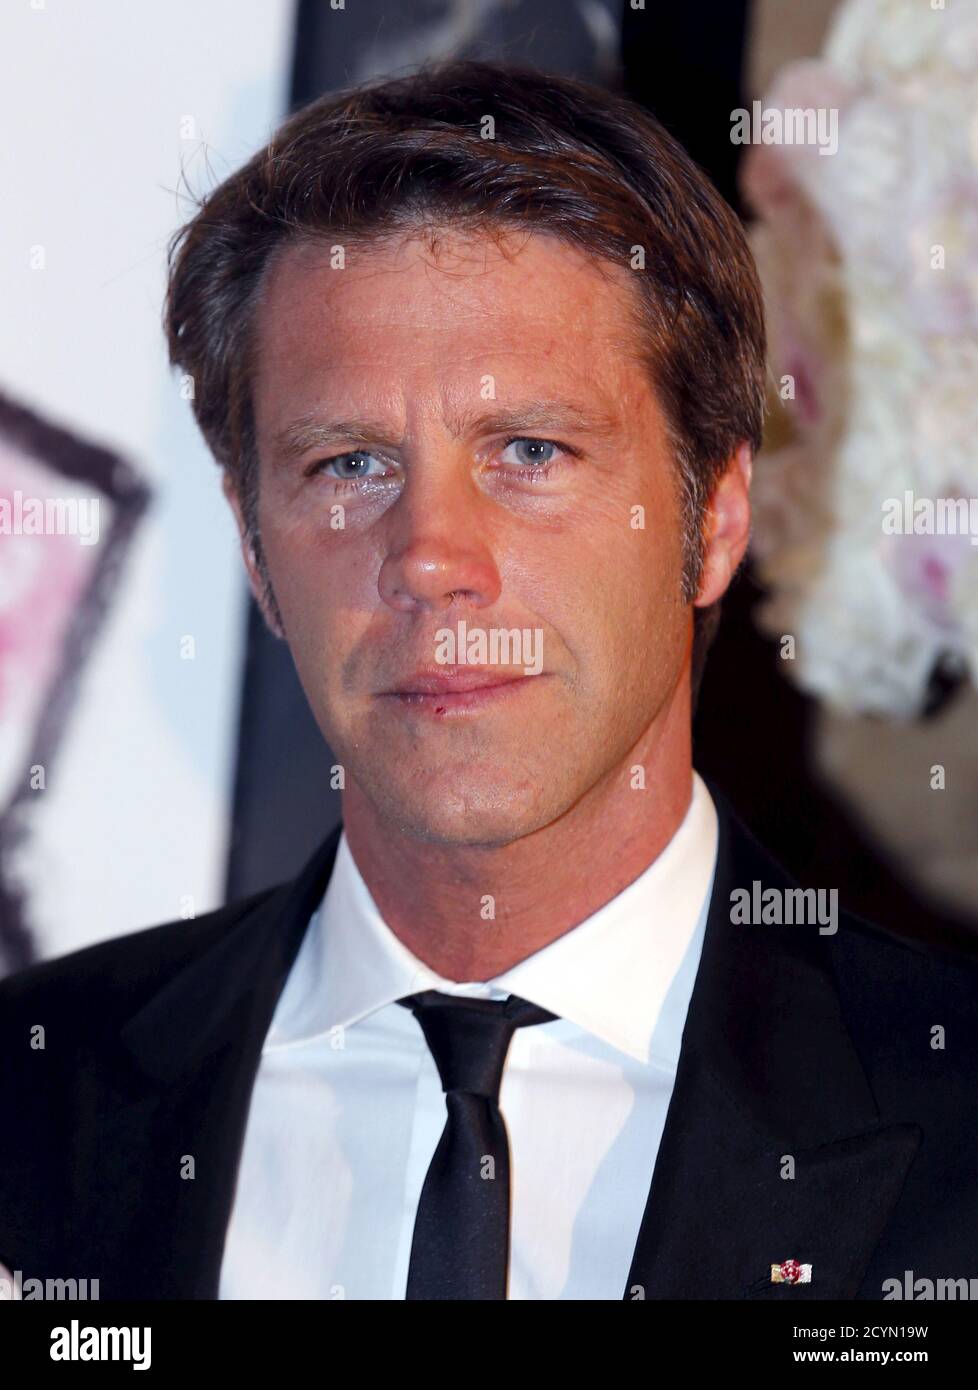 Prince Emanuele Filiberto di Savoia arrives at the Bal de la Rose in Monte  Carlo March 28, 2015. The Bal de la Rose is a traditional annual charity  event in aid of